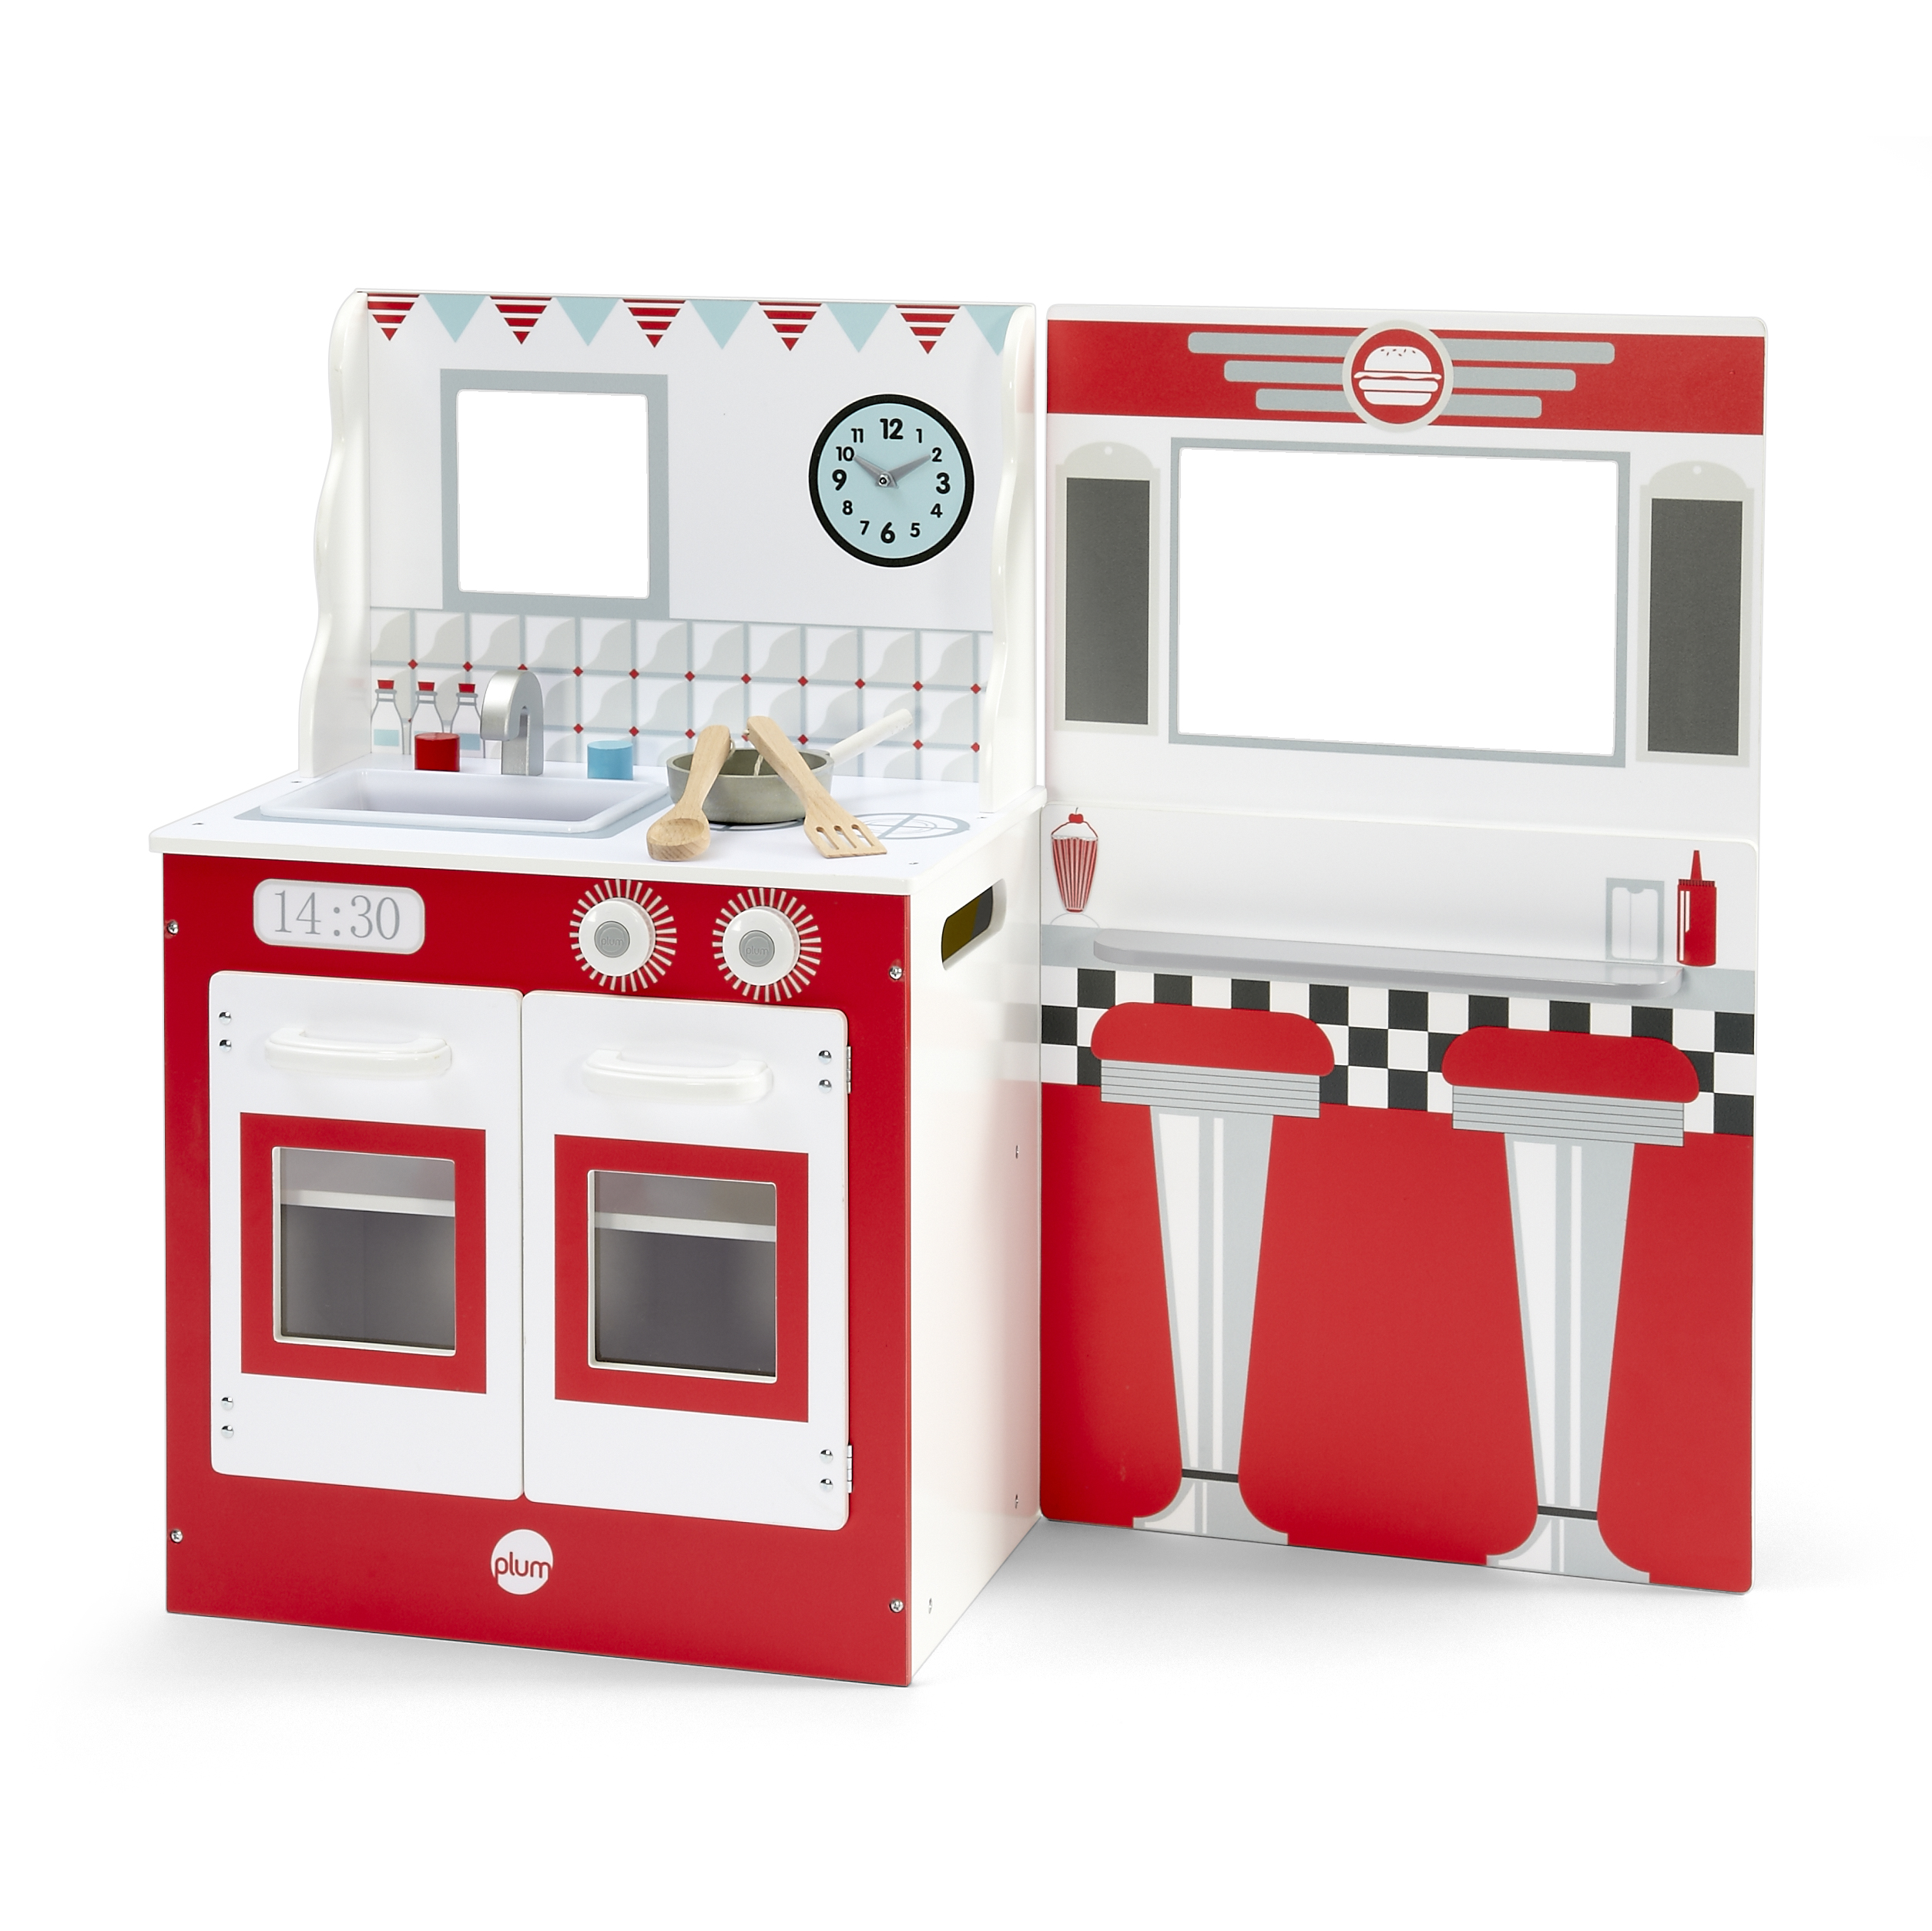 Plum 2 In 1 Kitchen Dolls House - image 4 of 9